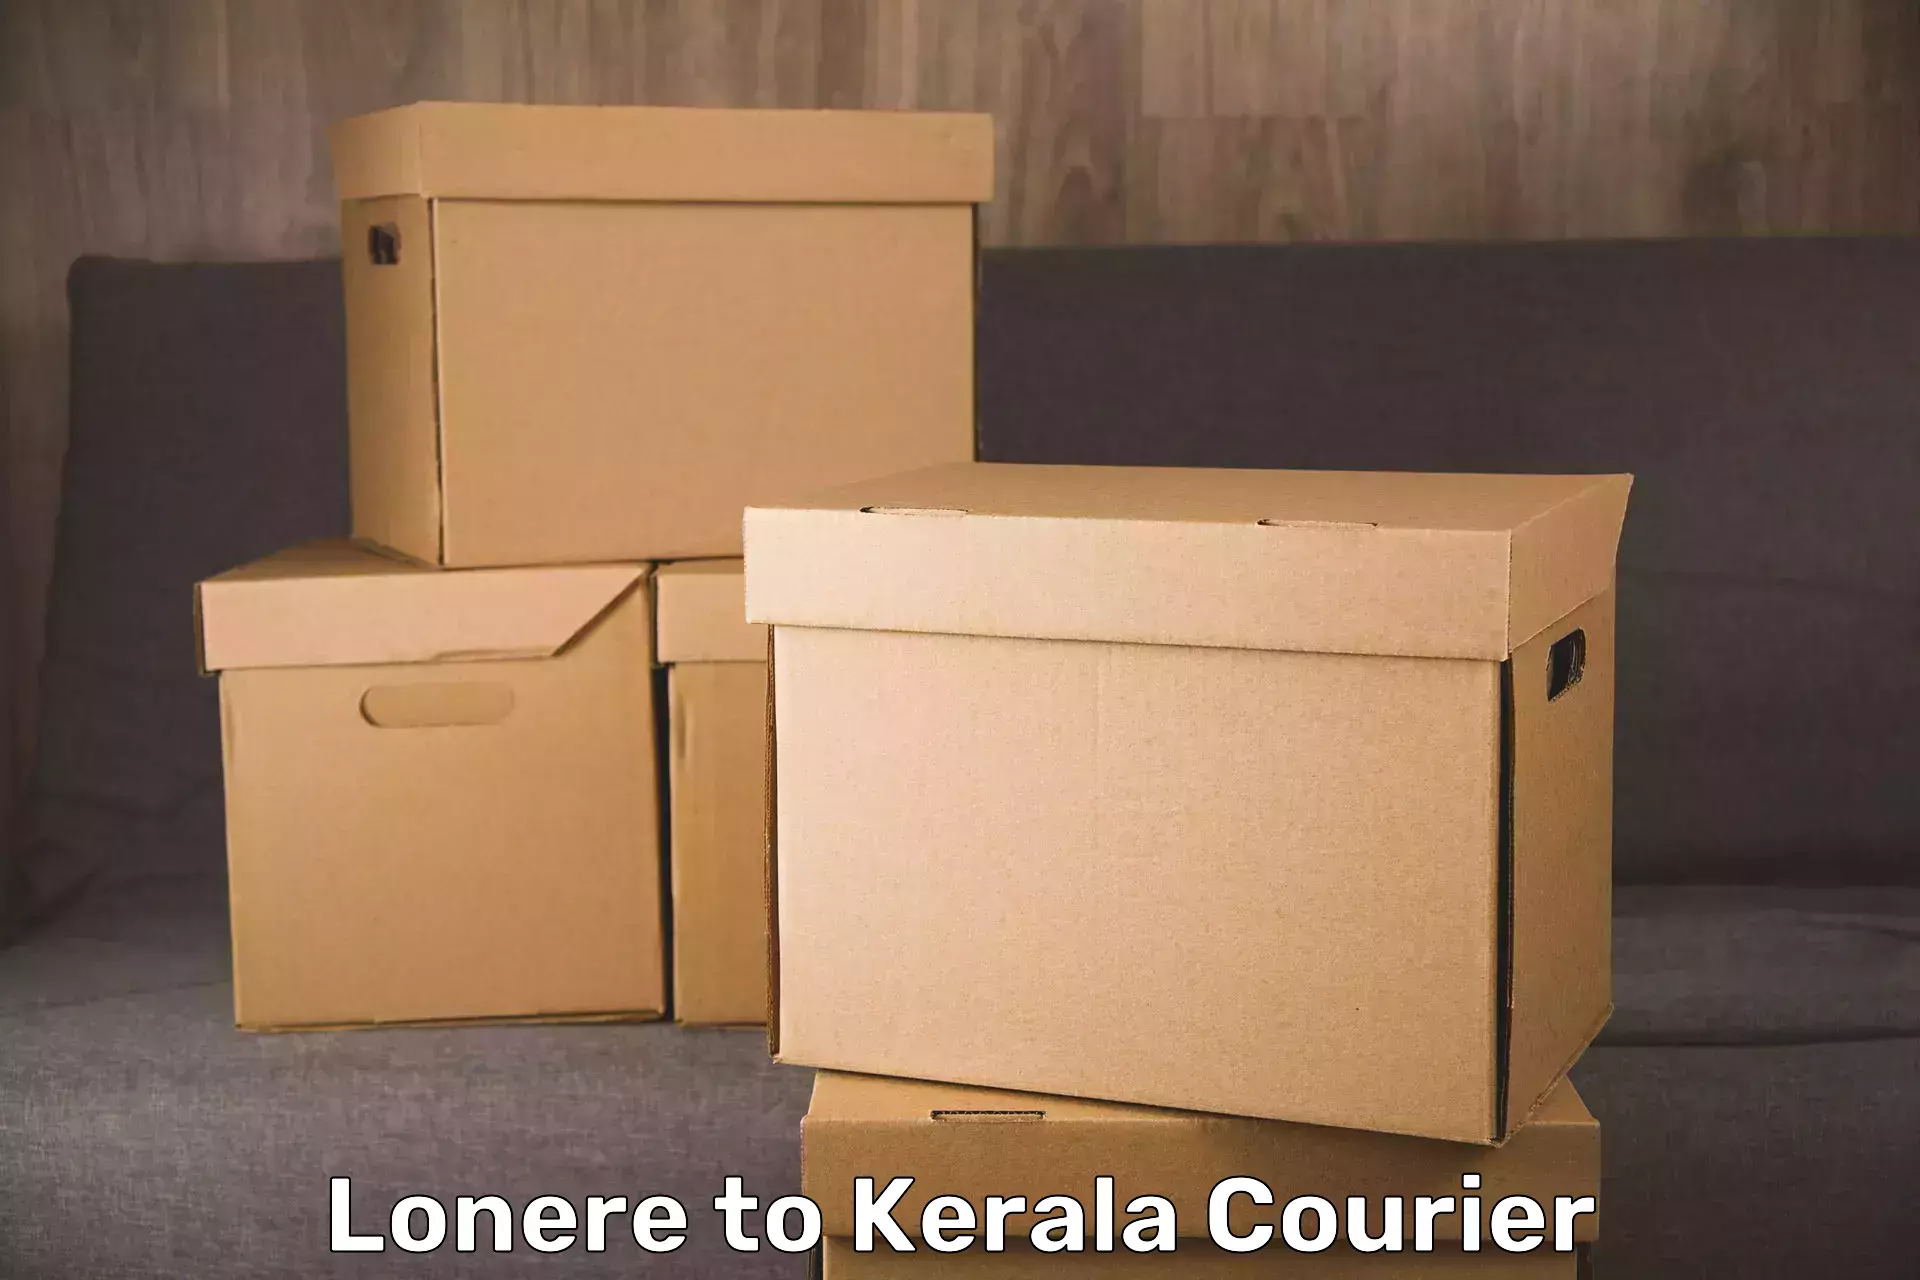 Baggage relocation service Lonere to Kerala